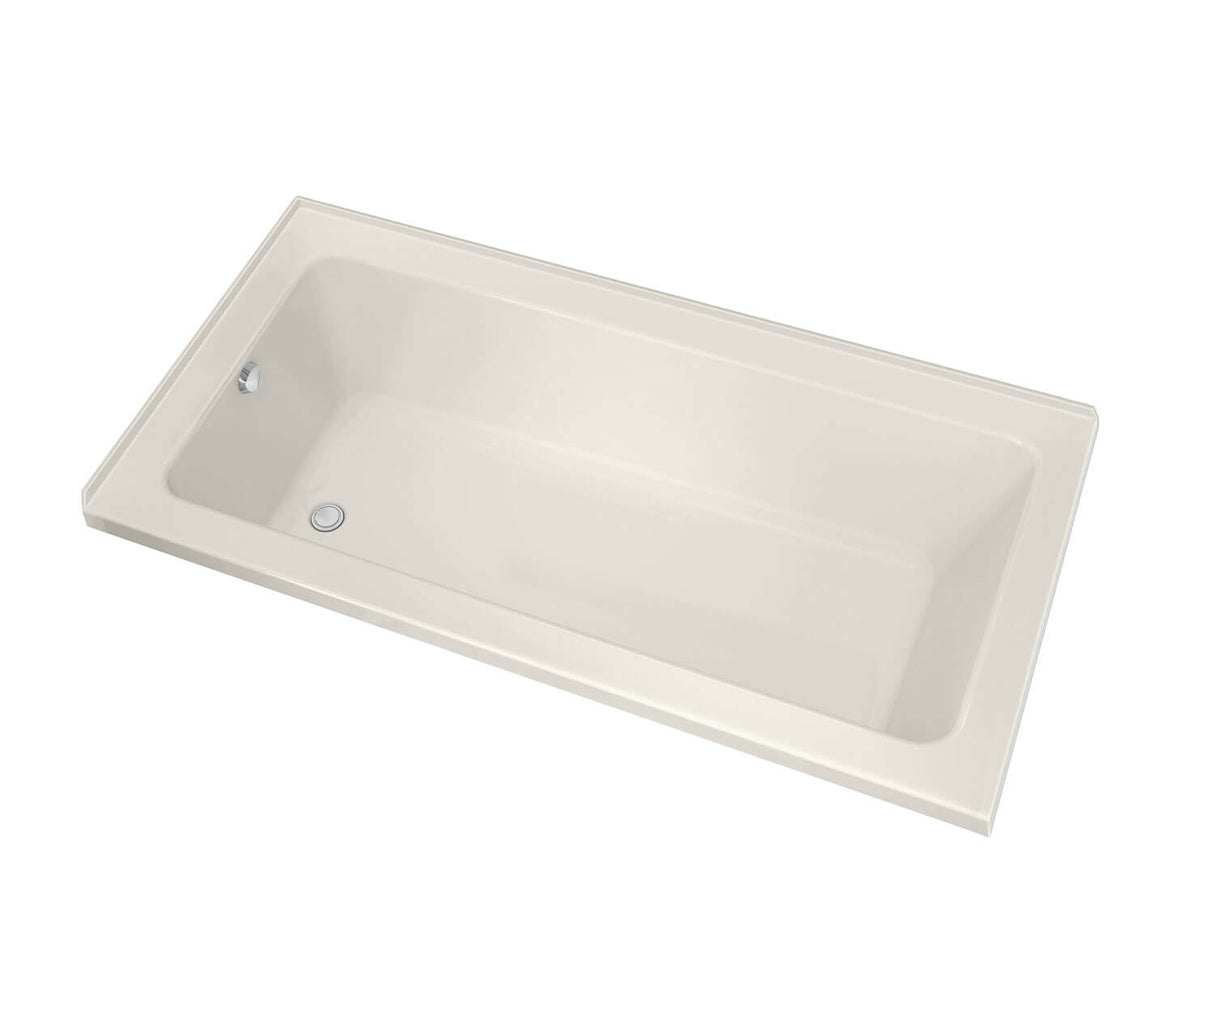 MAAX 106199-R-000-007 Pose Acrylic Corner Left Right-Hand Drain Bathtub in Biscuit